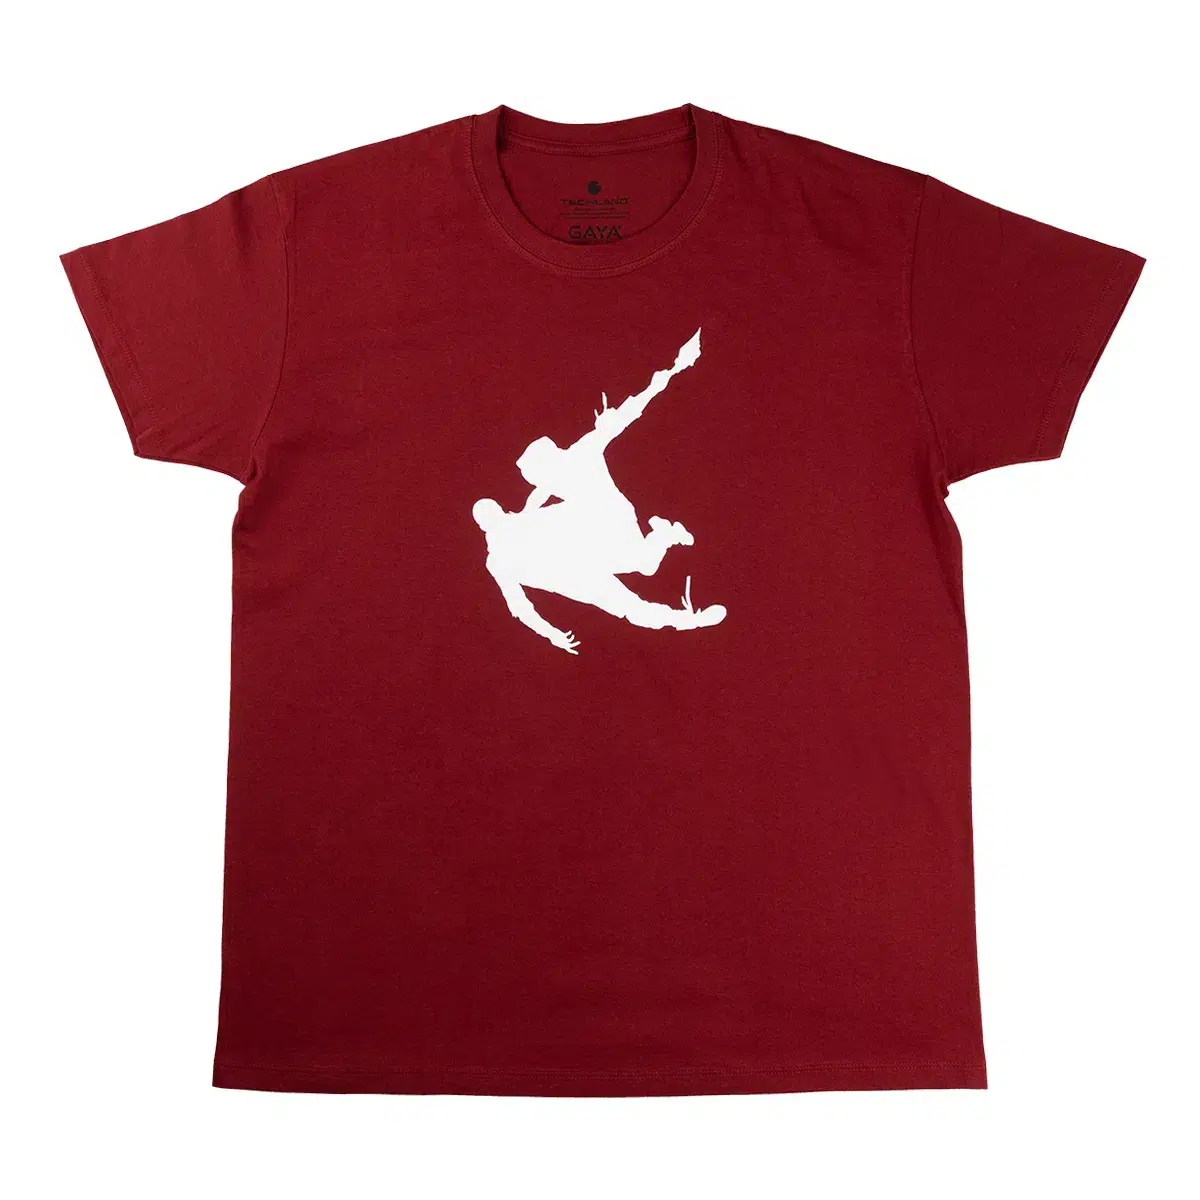 Dying Light 2 T-Shirt "Caldwell" Red S Cover